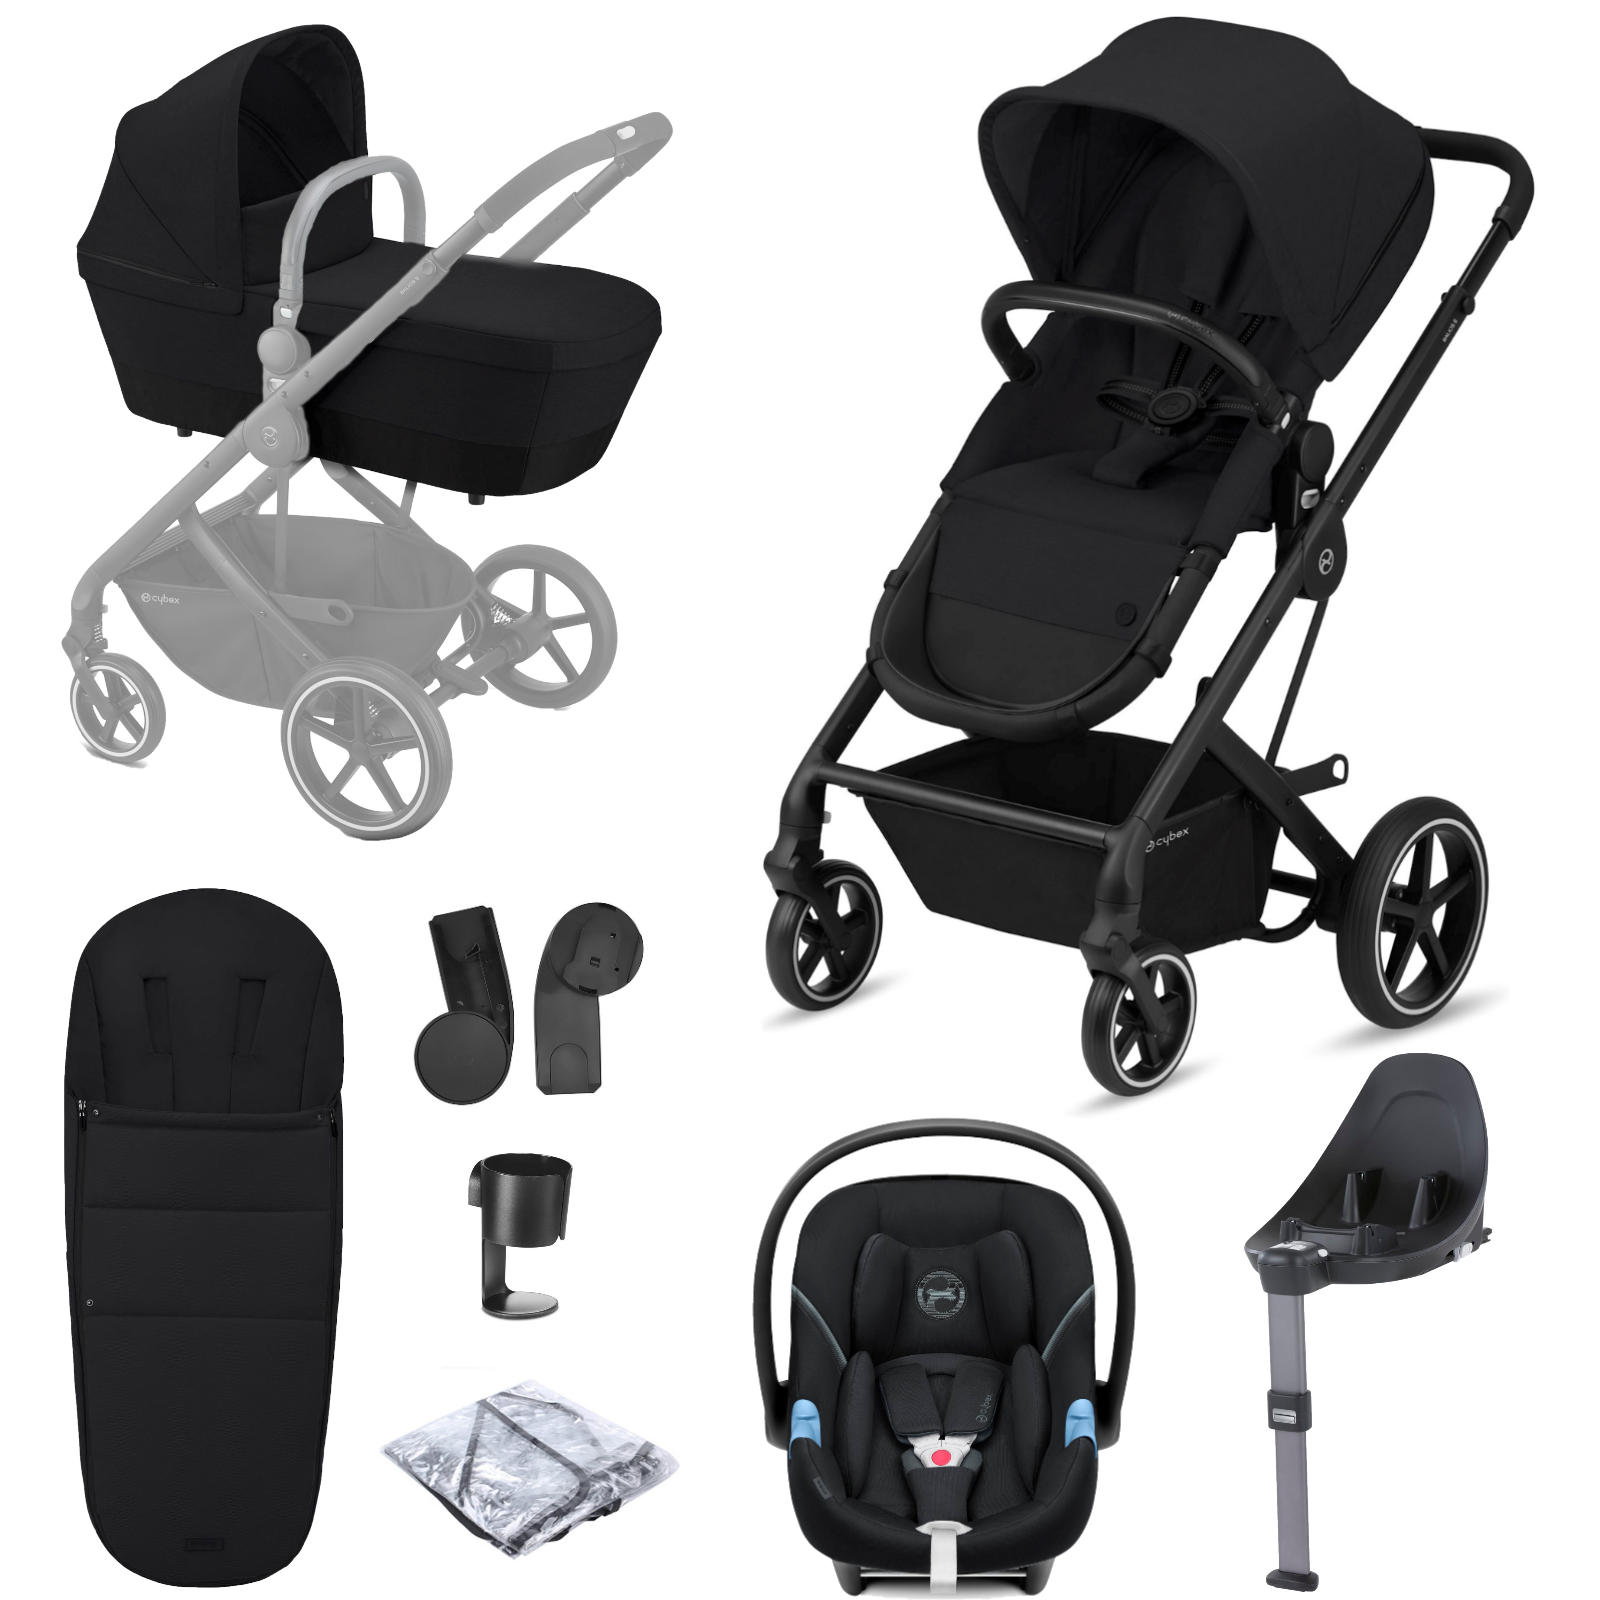 Cybex Balios 2in1 7 Piece (Aton M i-Size) Travel System with ISOFIX Base - Deep Black